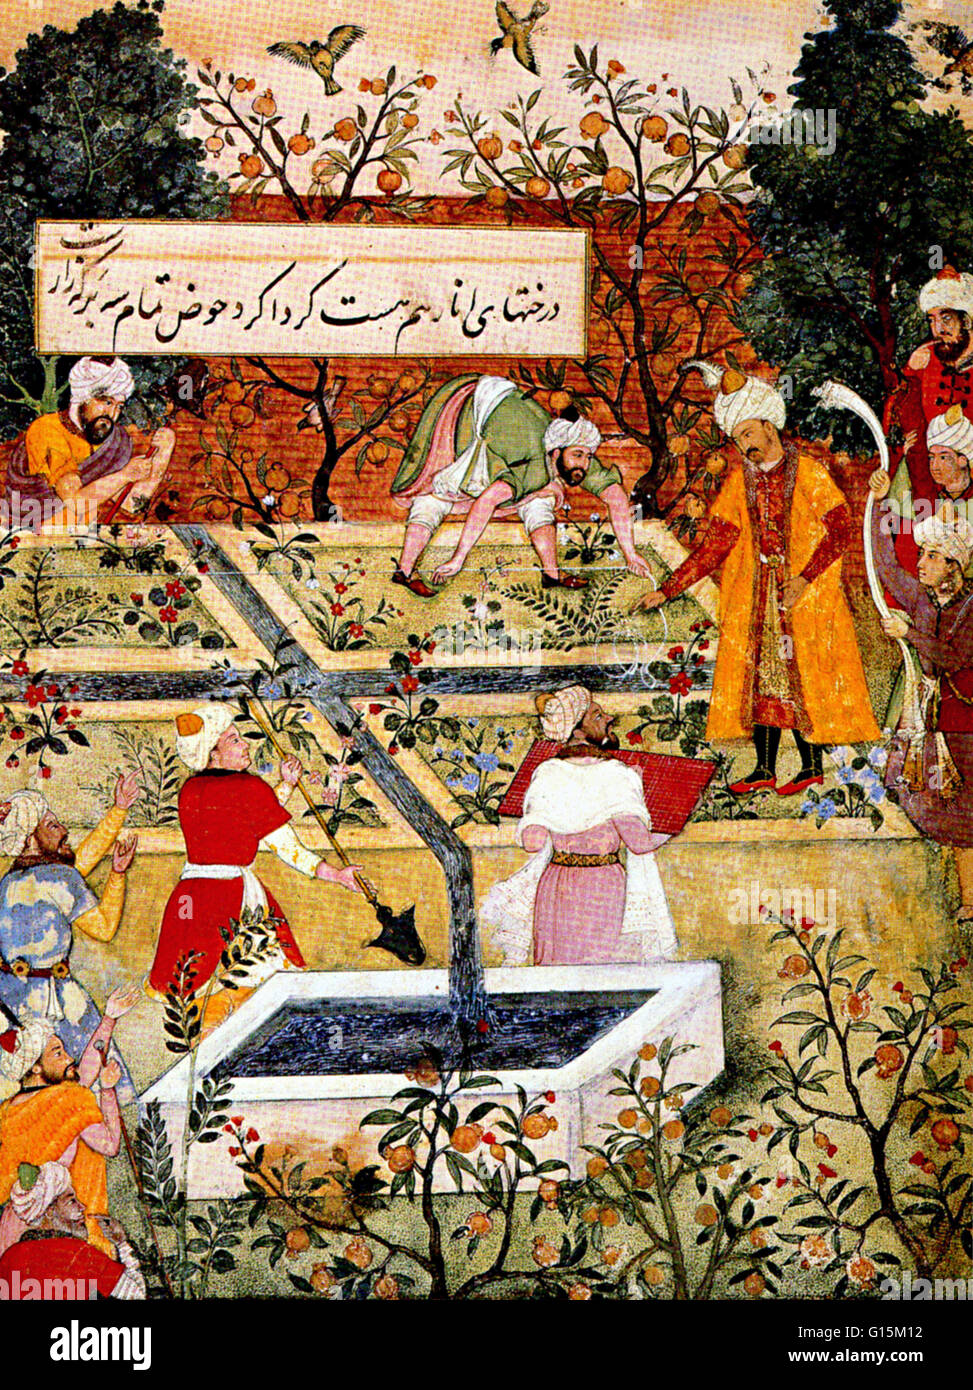 Image taken from the Baburnama. shows Babur Supervising the Laying Out of the Garden of Fidelity. The Bagh-e Vafa (Garden of Fidelity) was Babur's first garden in what is now Afganistan. Zahir-ud-din Muhammad Babur (1483-1530) was a conqueror from Central Stock Photo